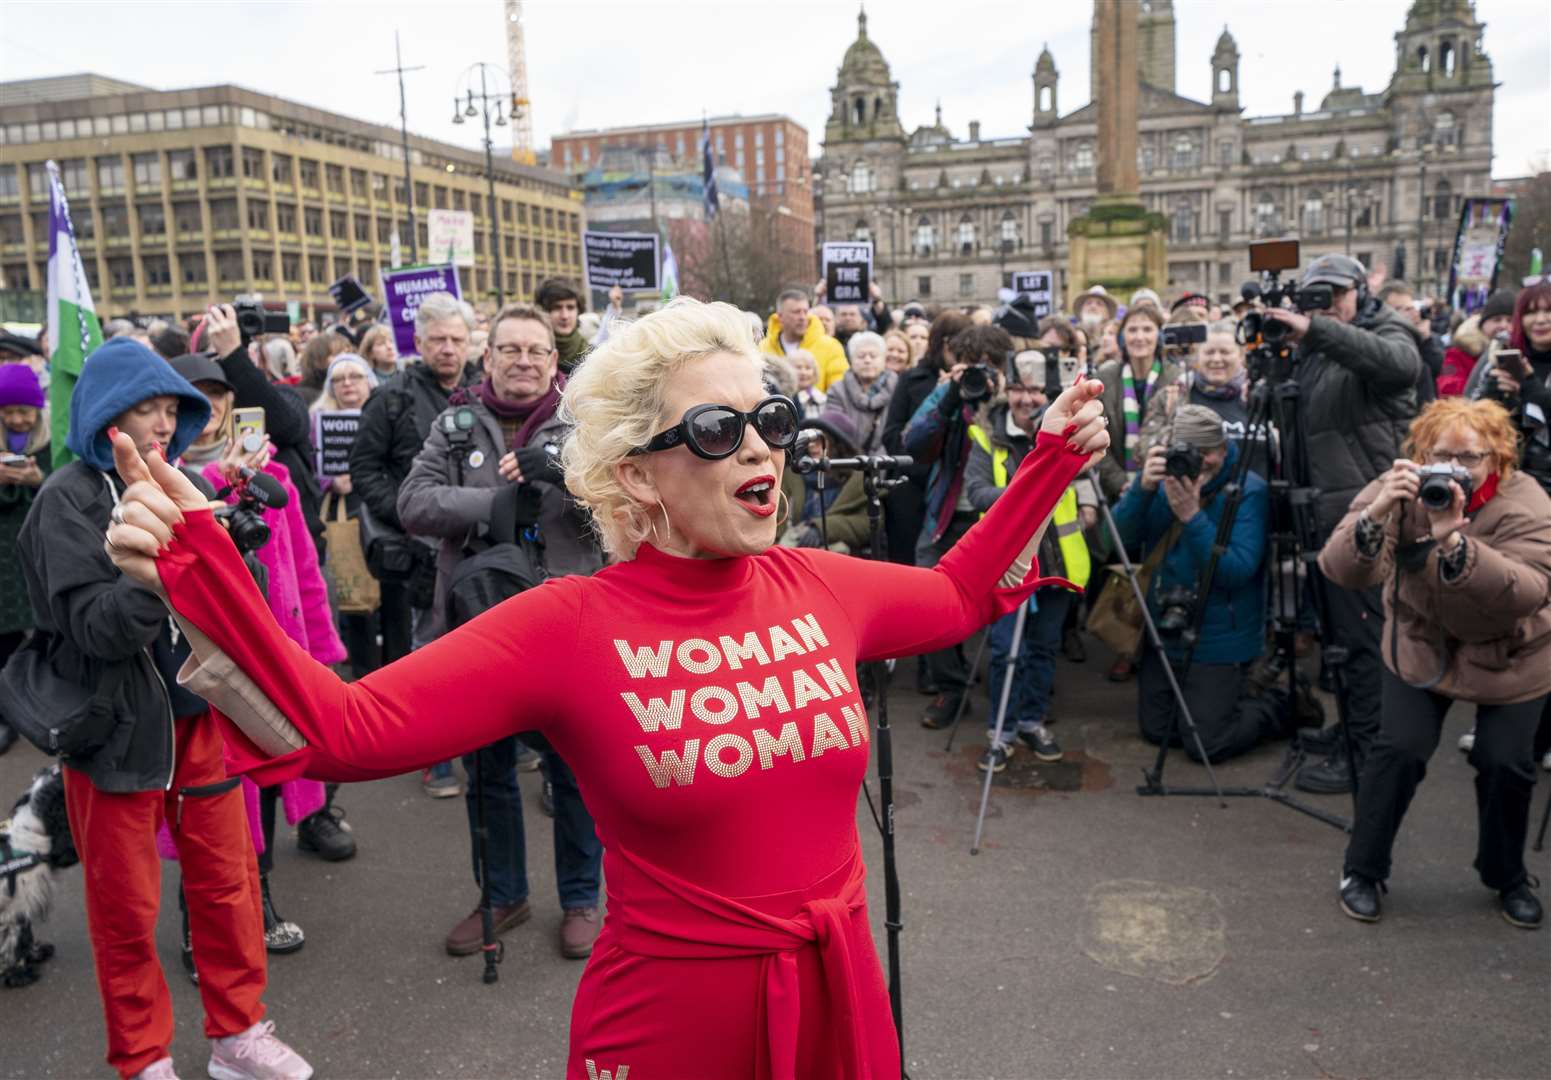 The event was organised by controversial gender critic Kellie-Jay Keen (Jane Barlow/PA)